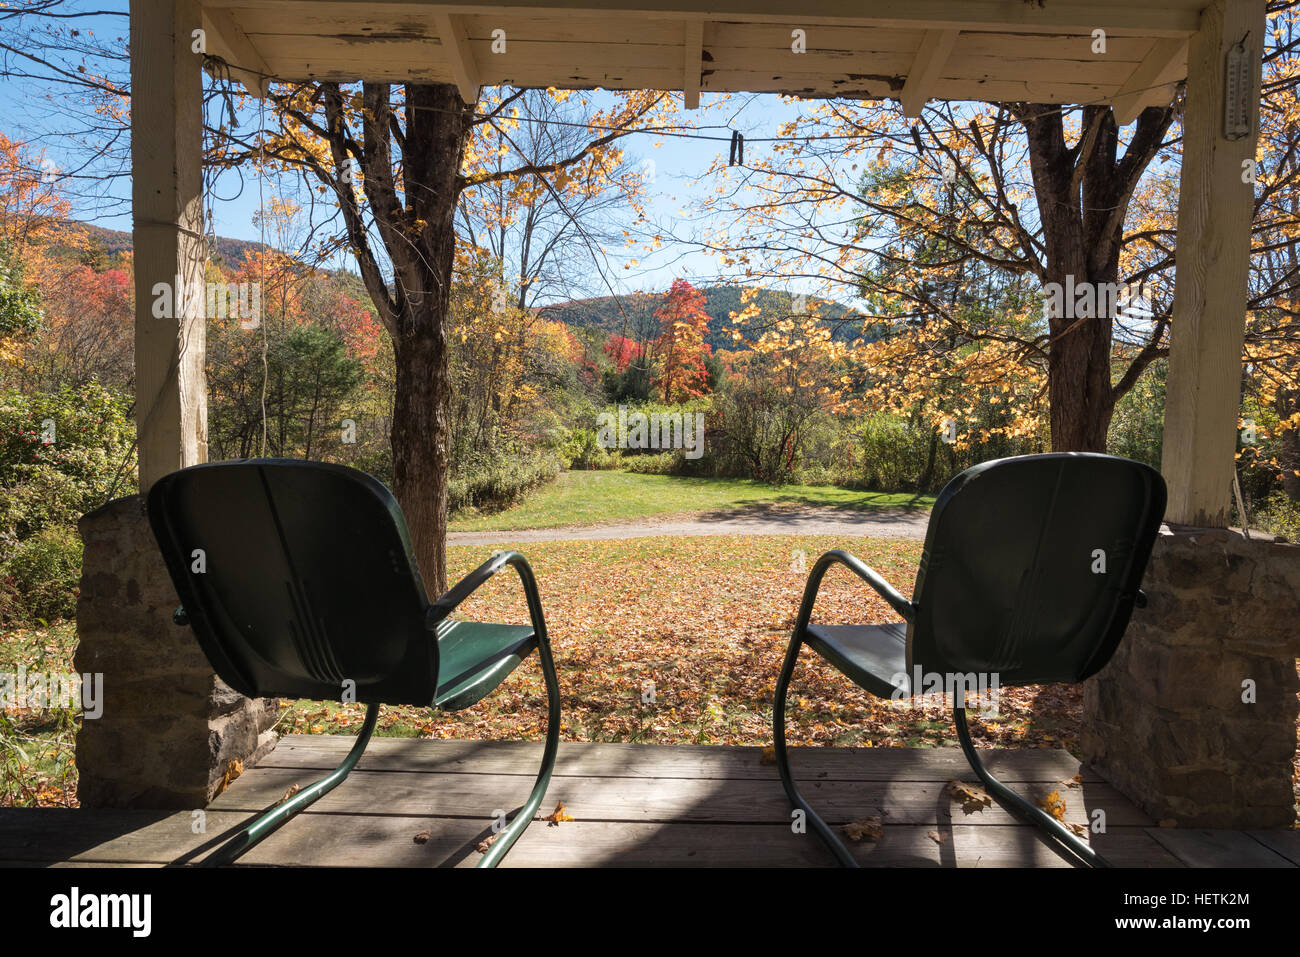 View from the porch of a house in New York's Adirondack Mountains. Stock Photo